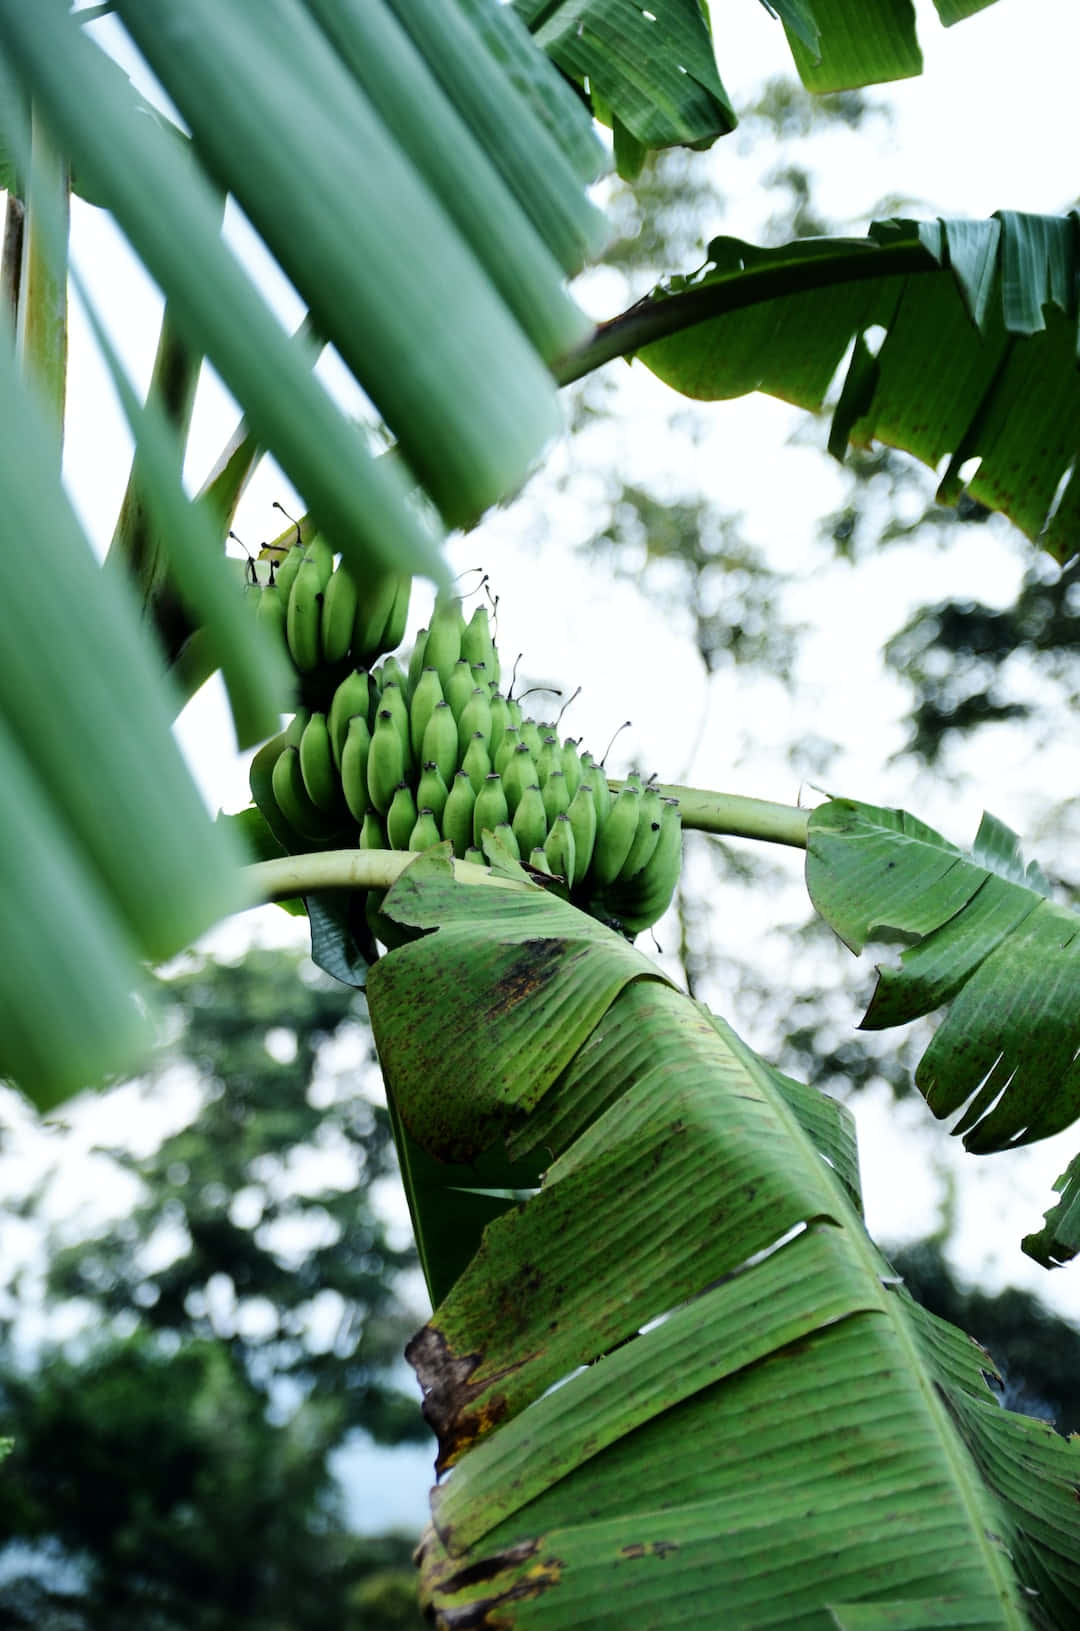 A Banana Tree with Delightful Green Leaves.